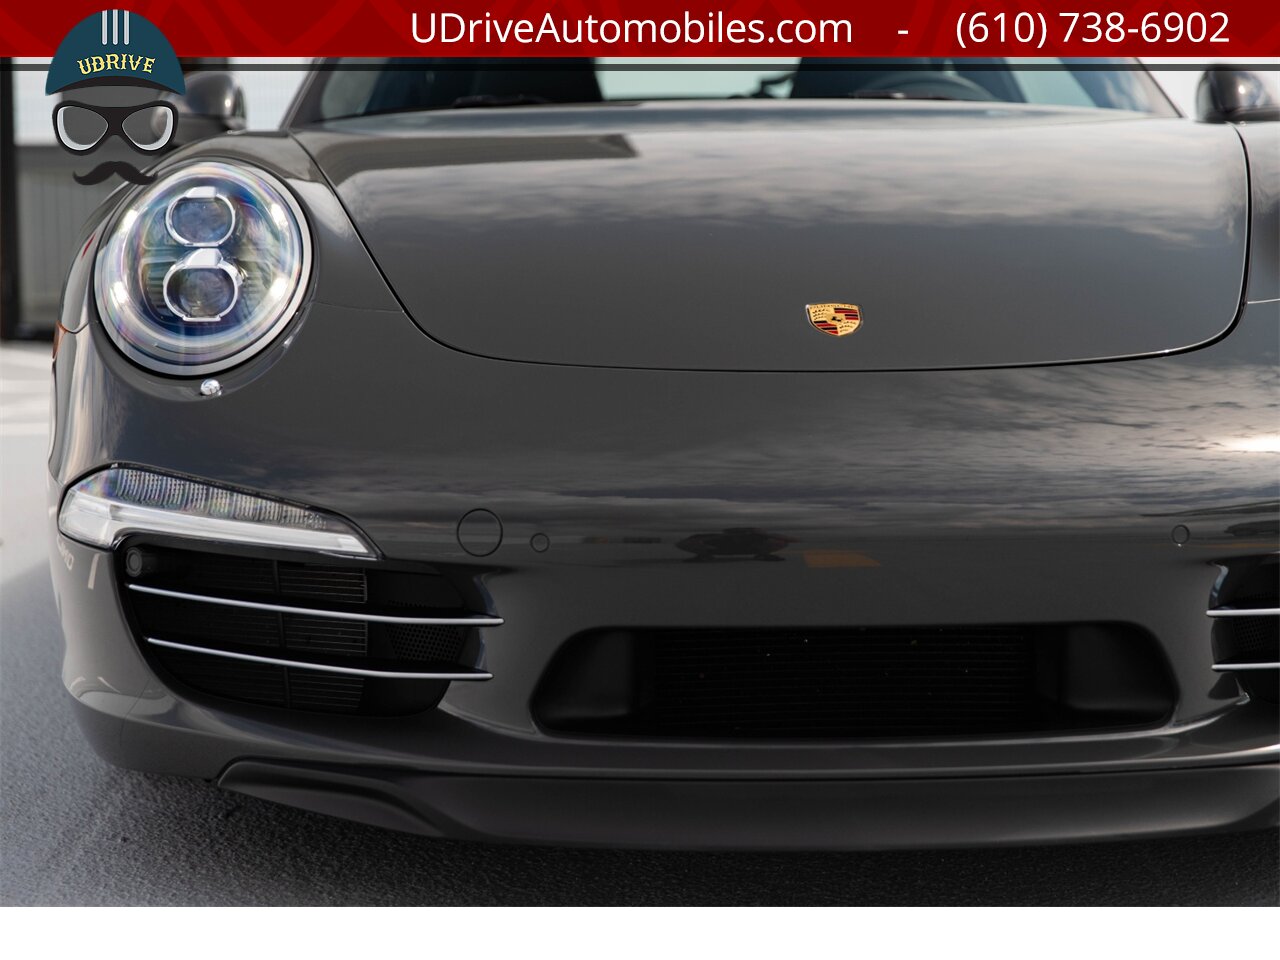 2014 Porsche 911 Carrera S 50th Anniversary Edition Certified  CPO Warranty thru 12/26/21 Full Front End Clear Film - Photo 12 - West Chester, PA 19382